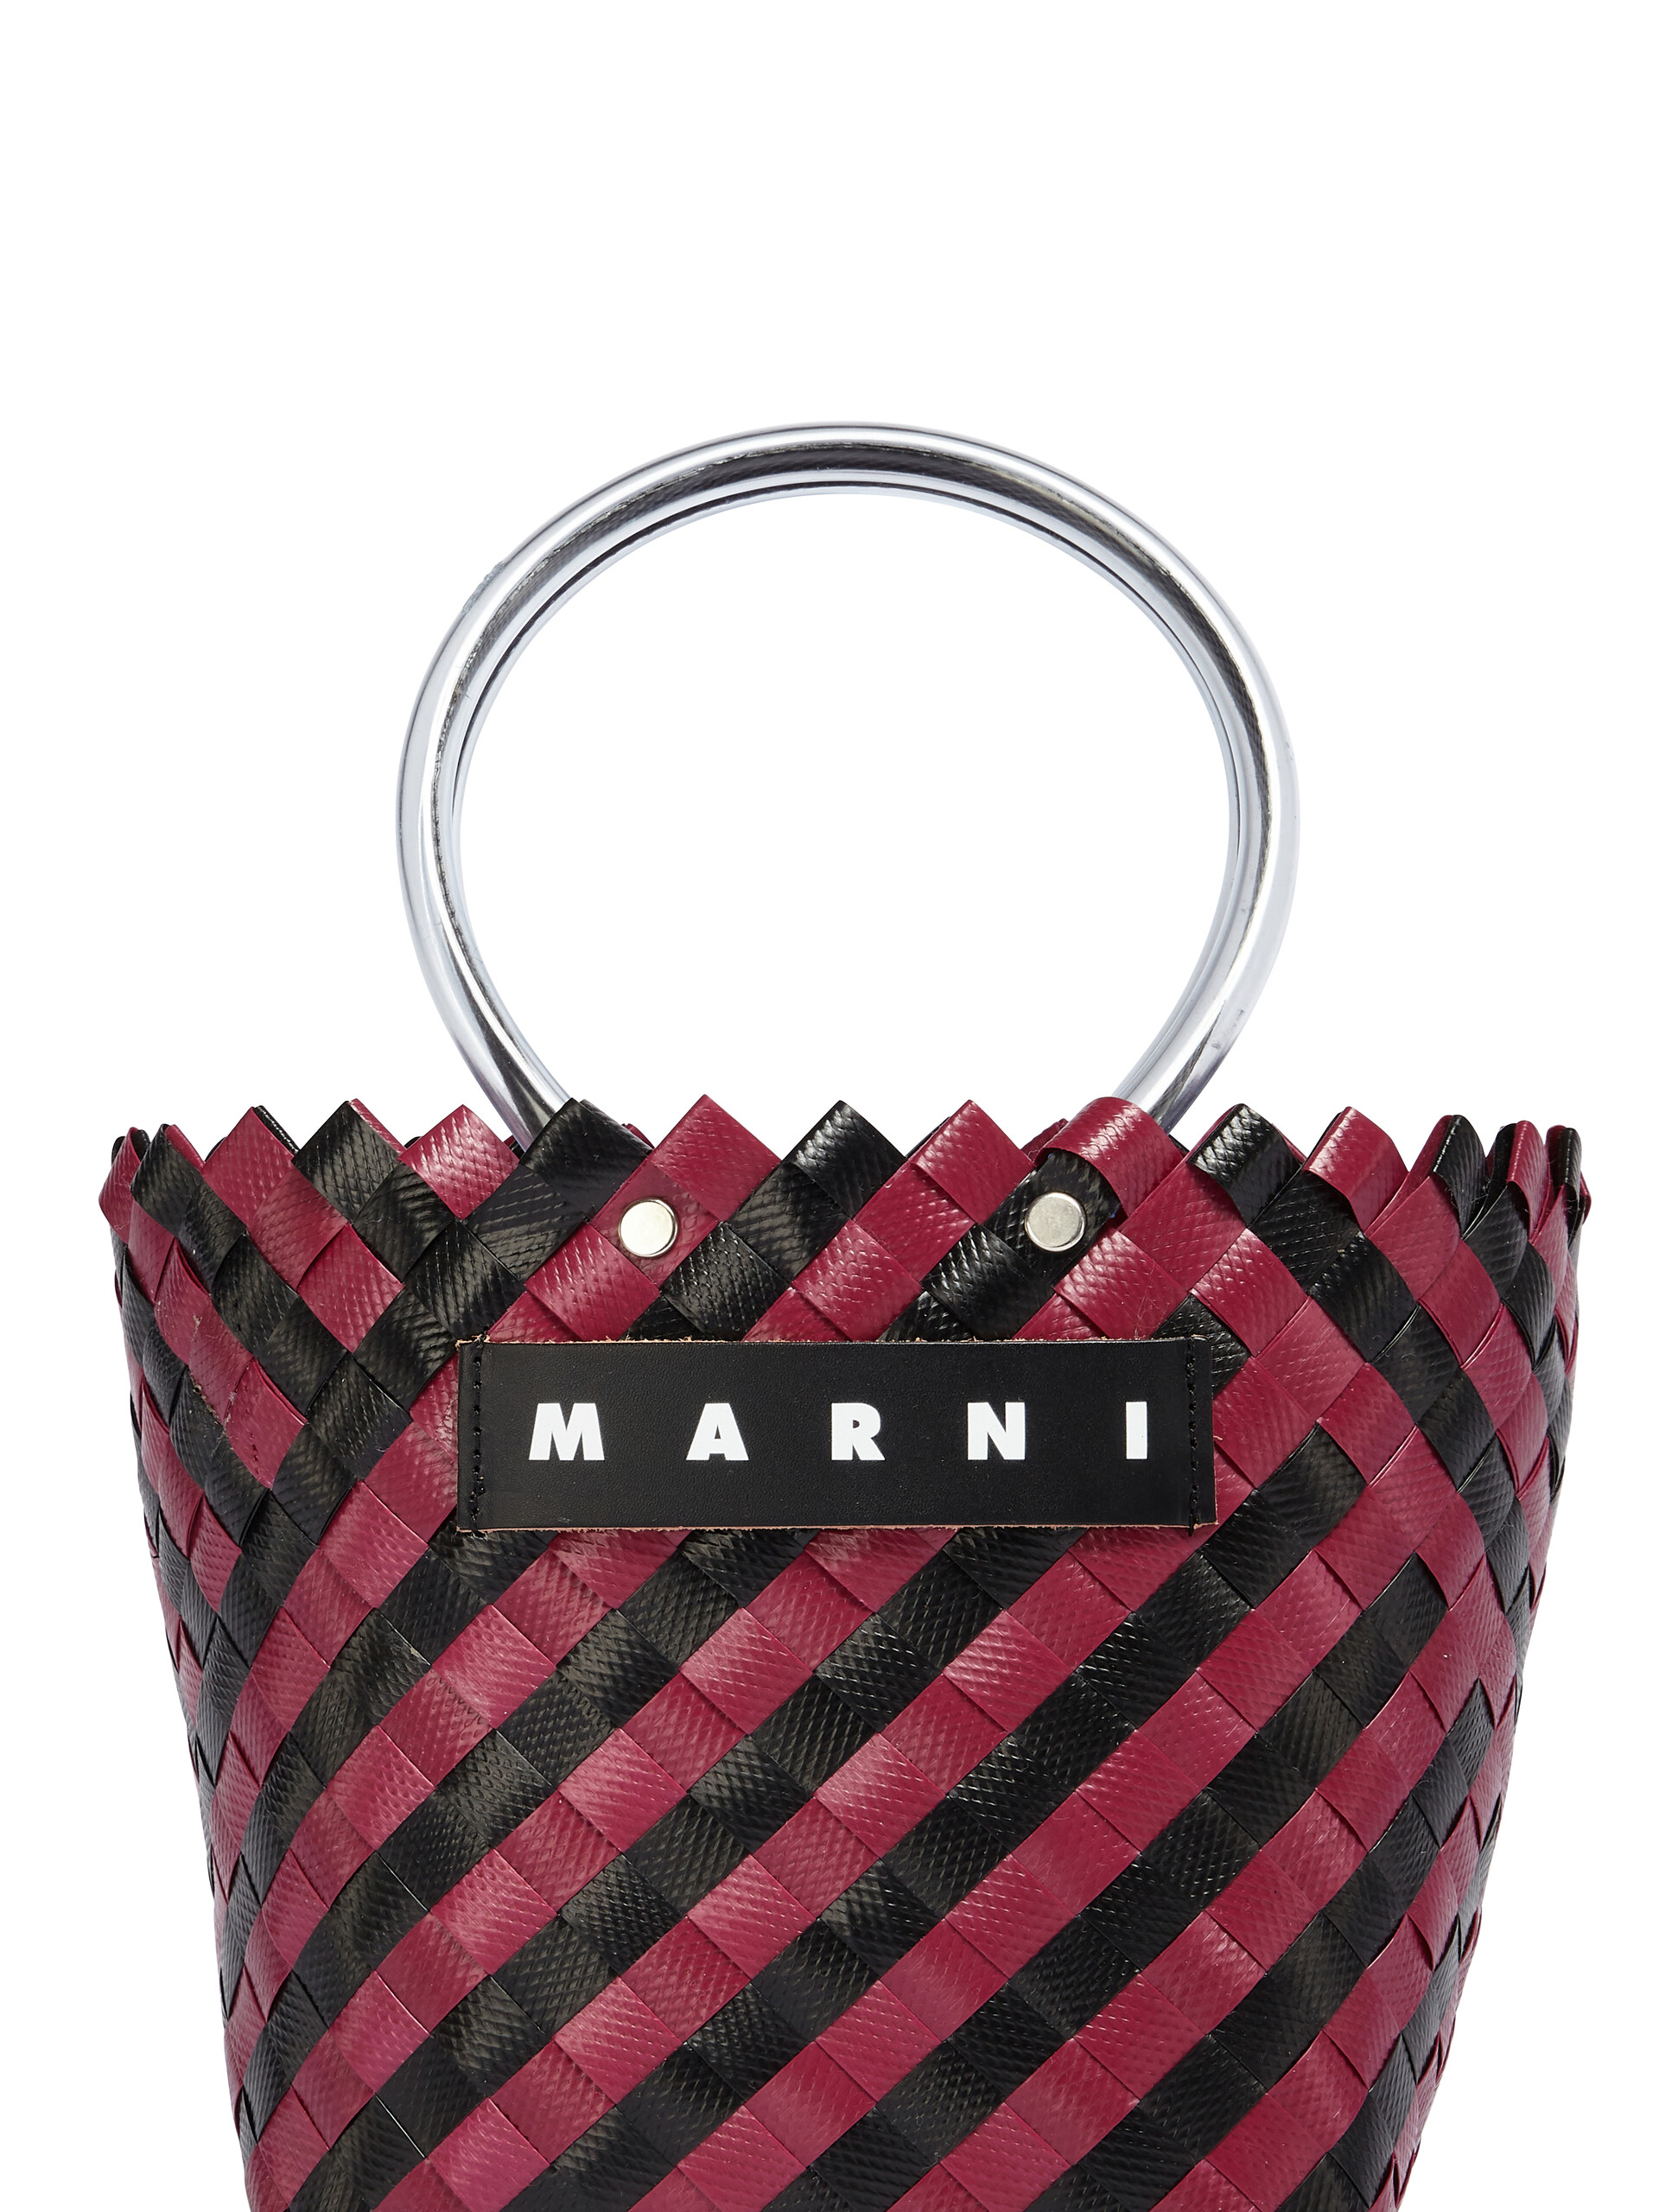 MARNI MARKET bag in black and burgundy woven material - Bags - Image 4